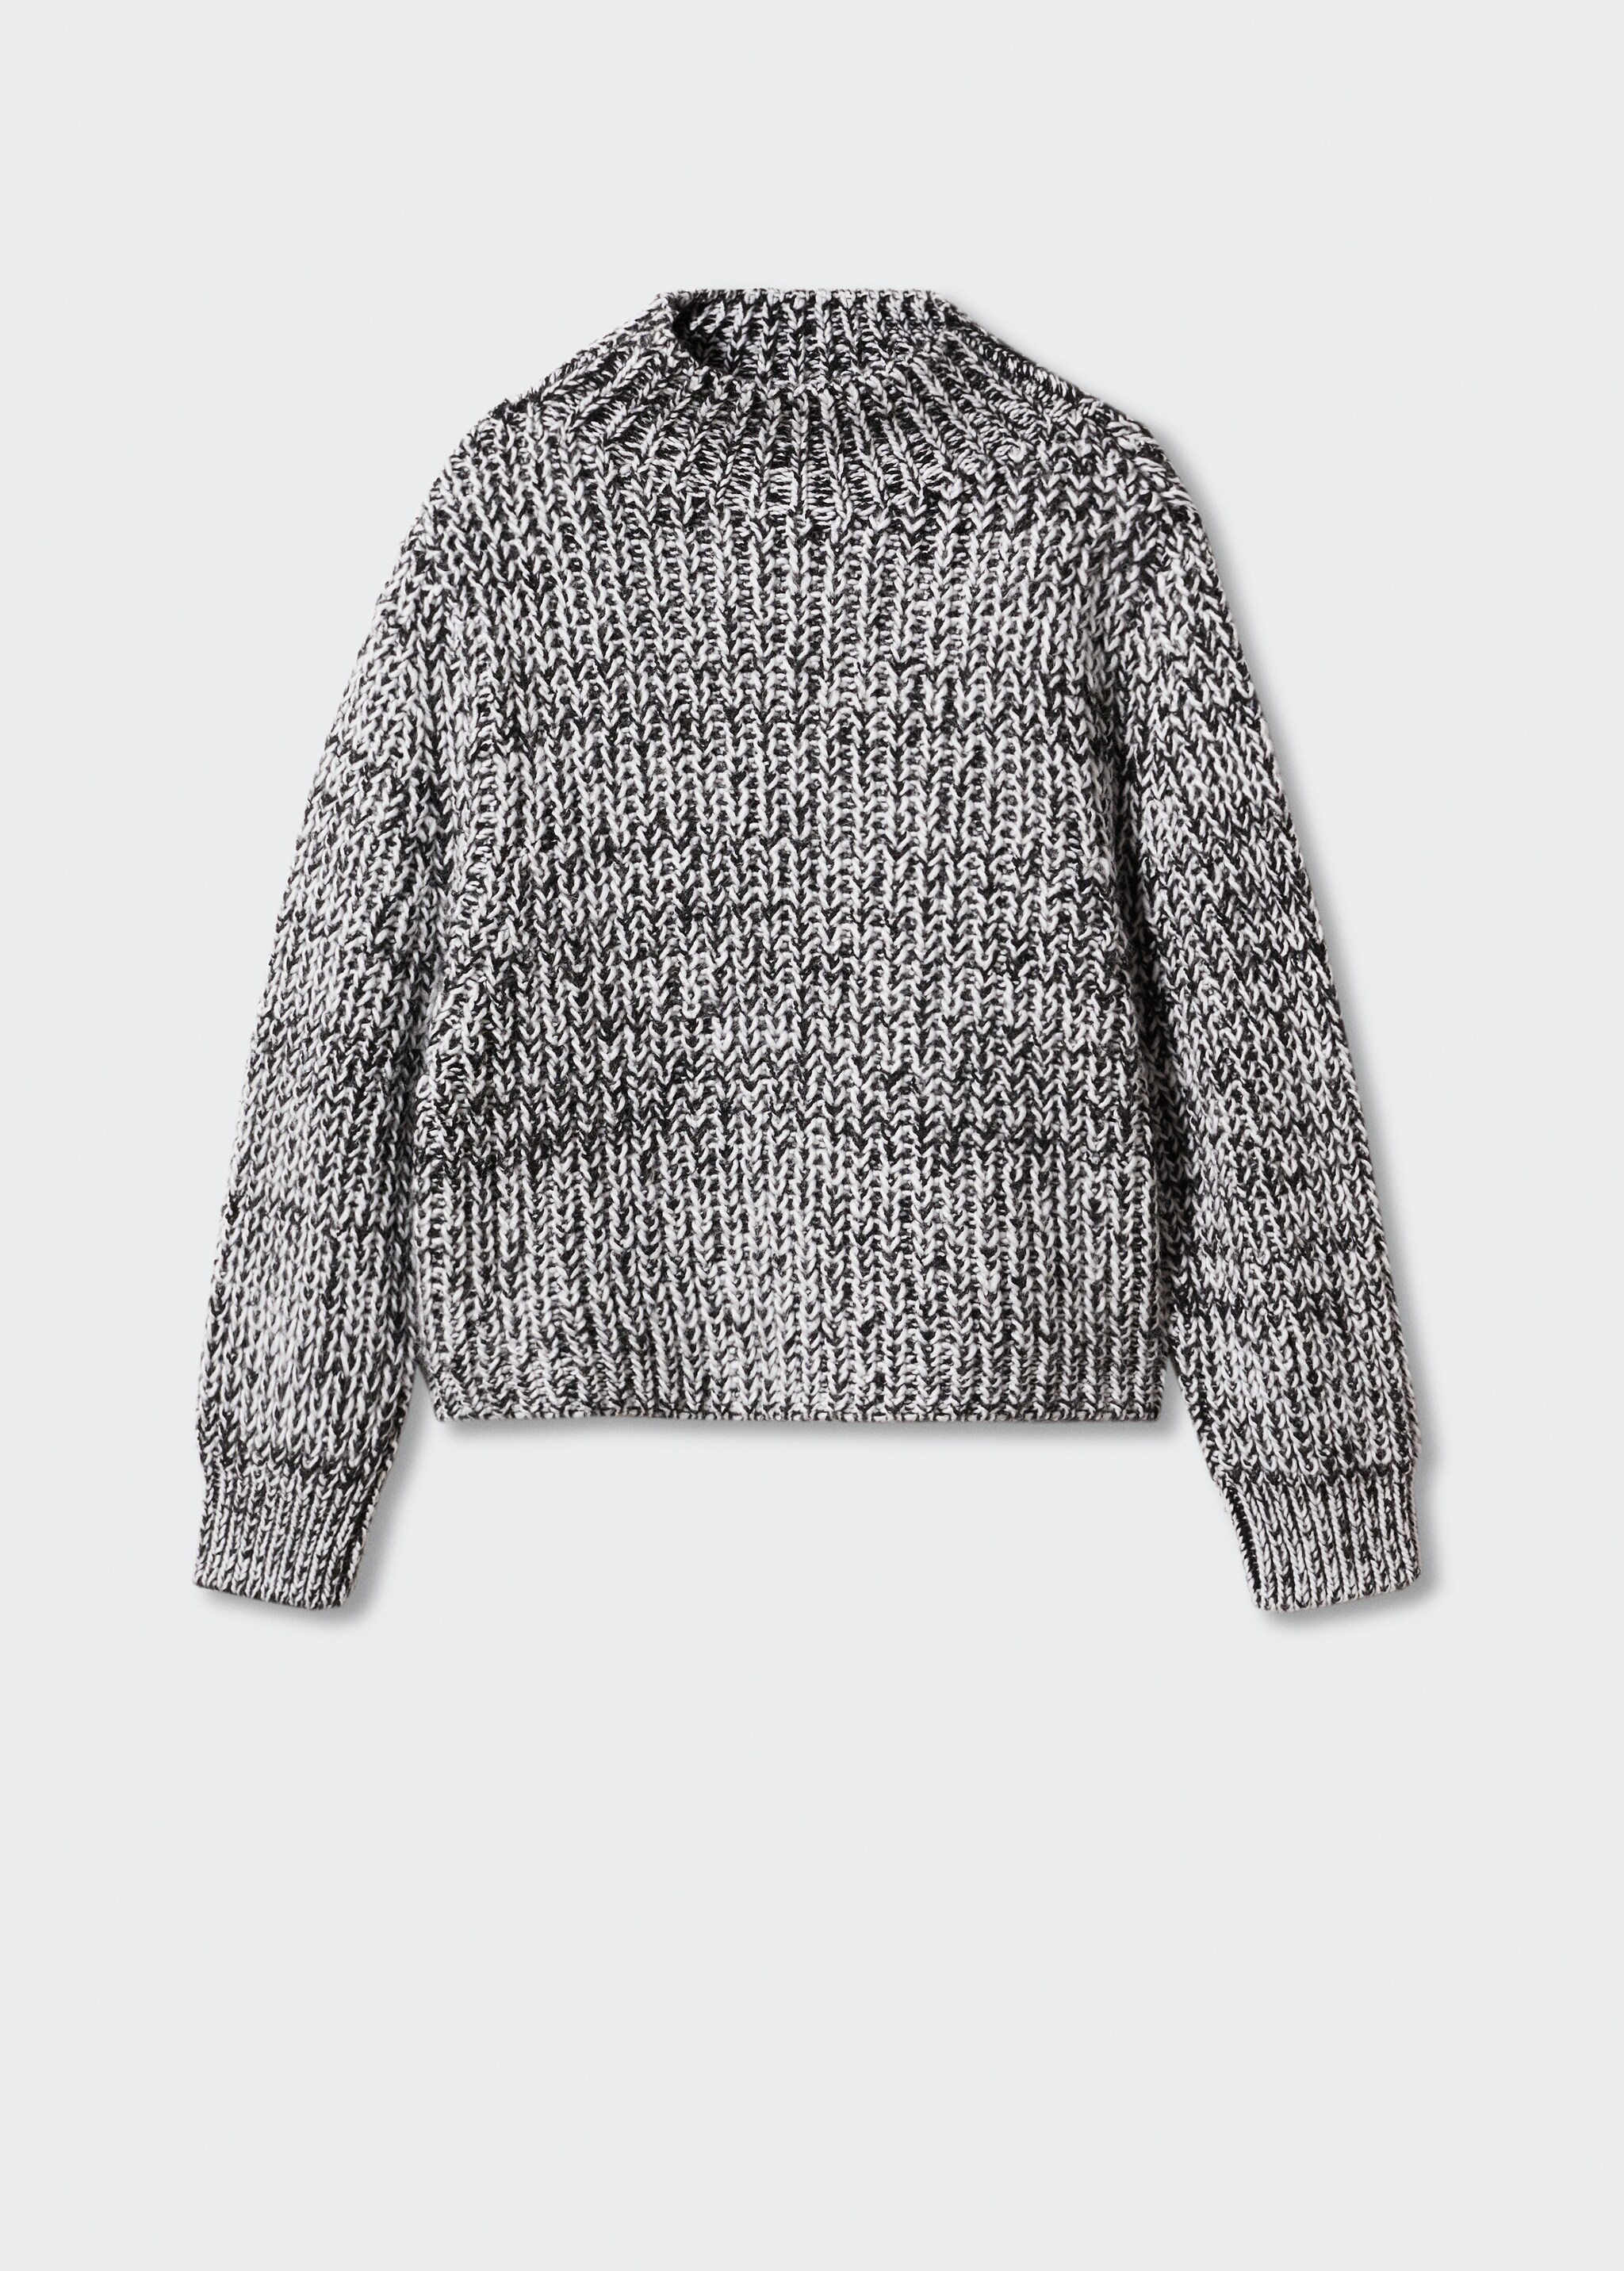 Knitted braided sweater - Article without model